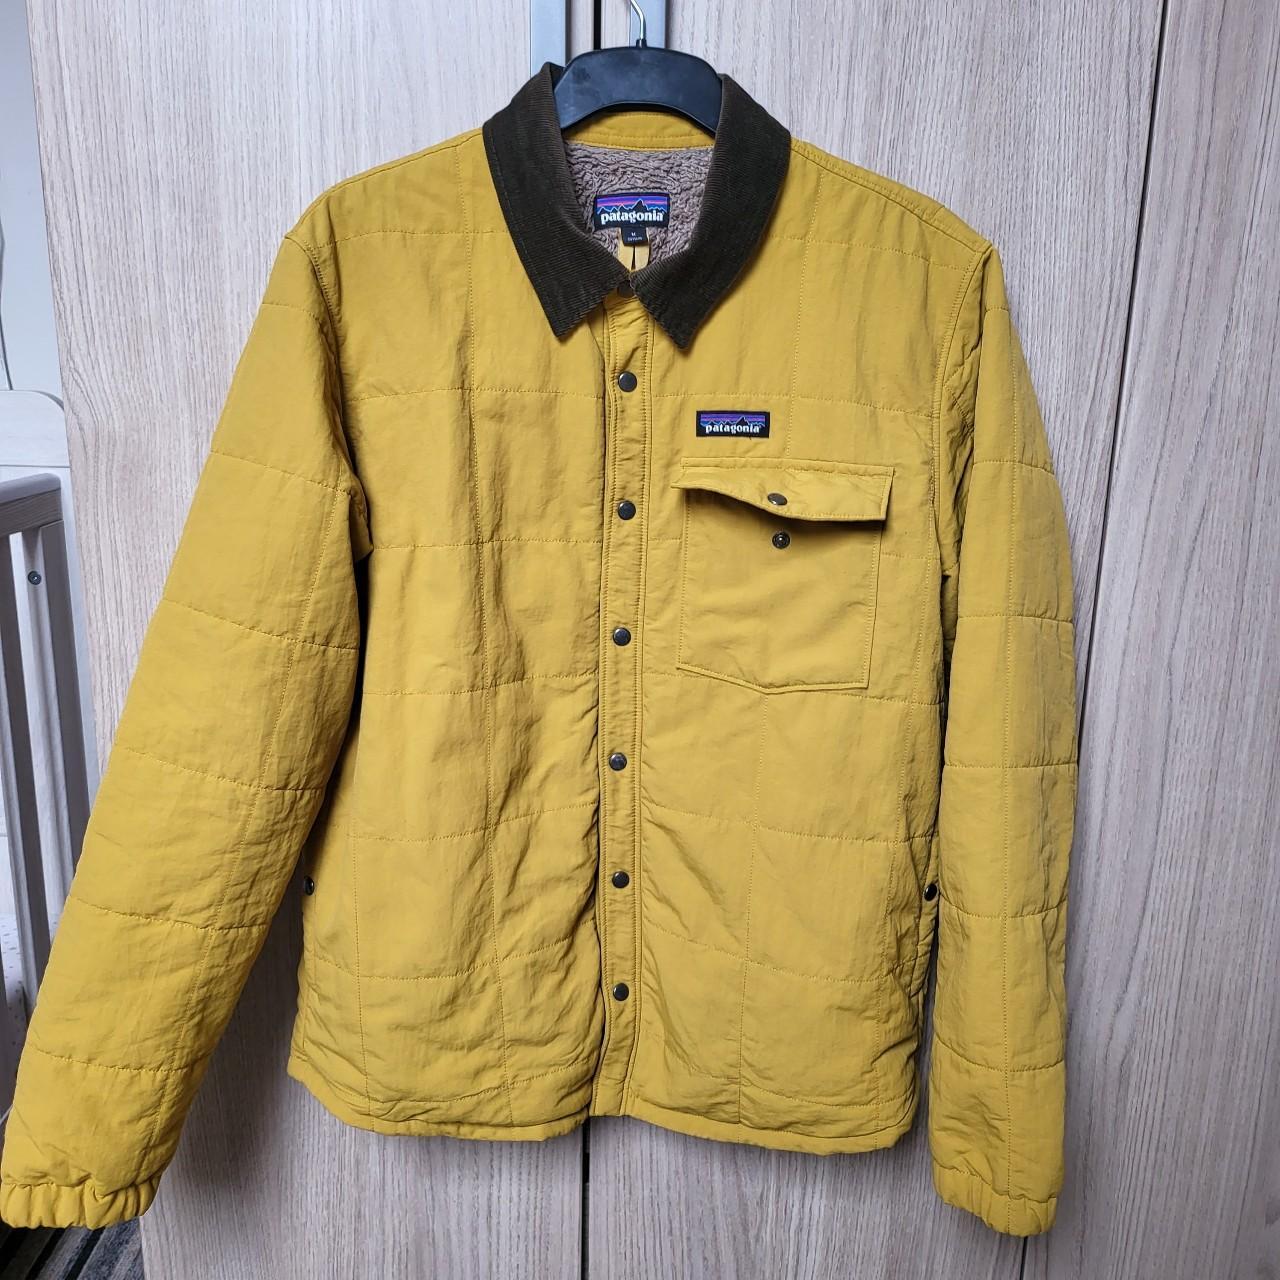 Patagonia Isthmus quilted shirt jacket in size M. A... - Depop